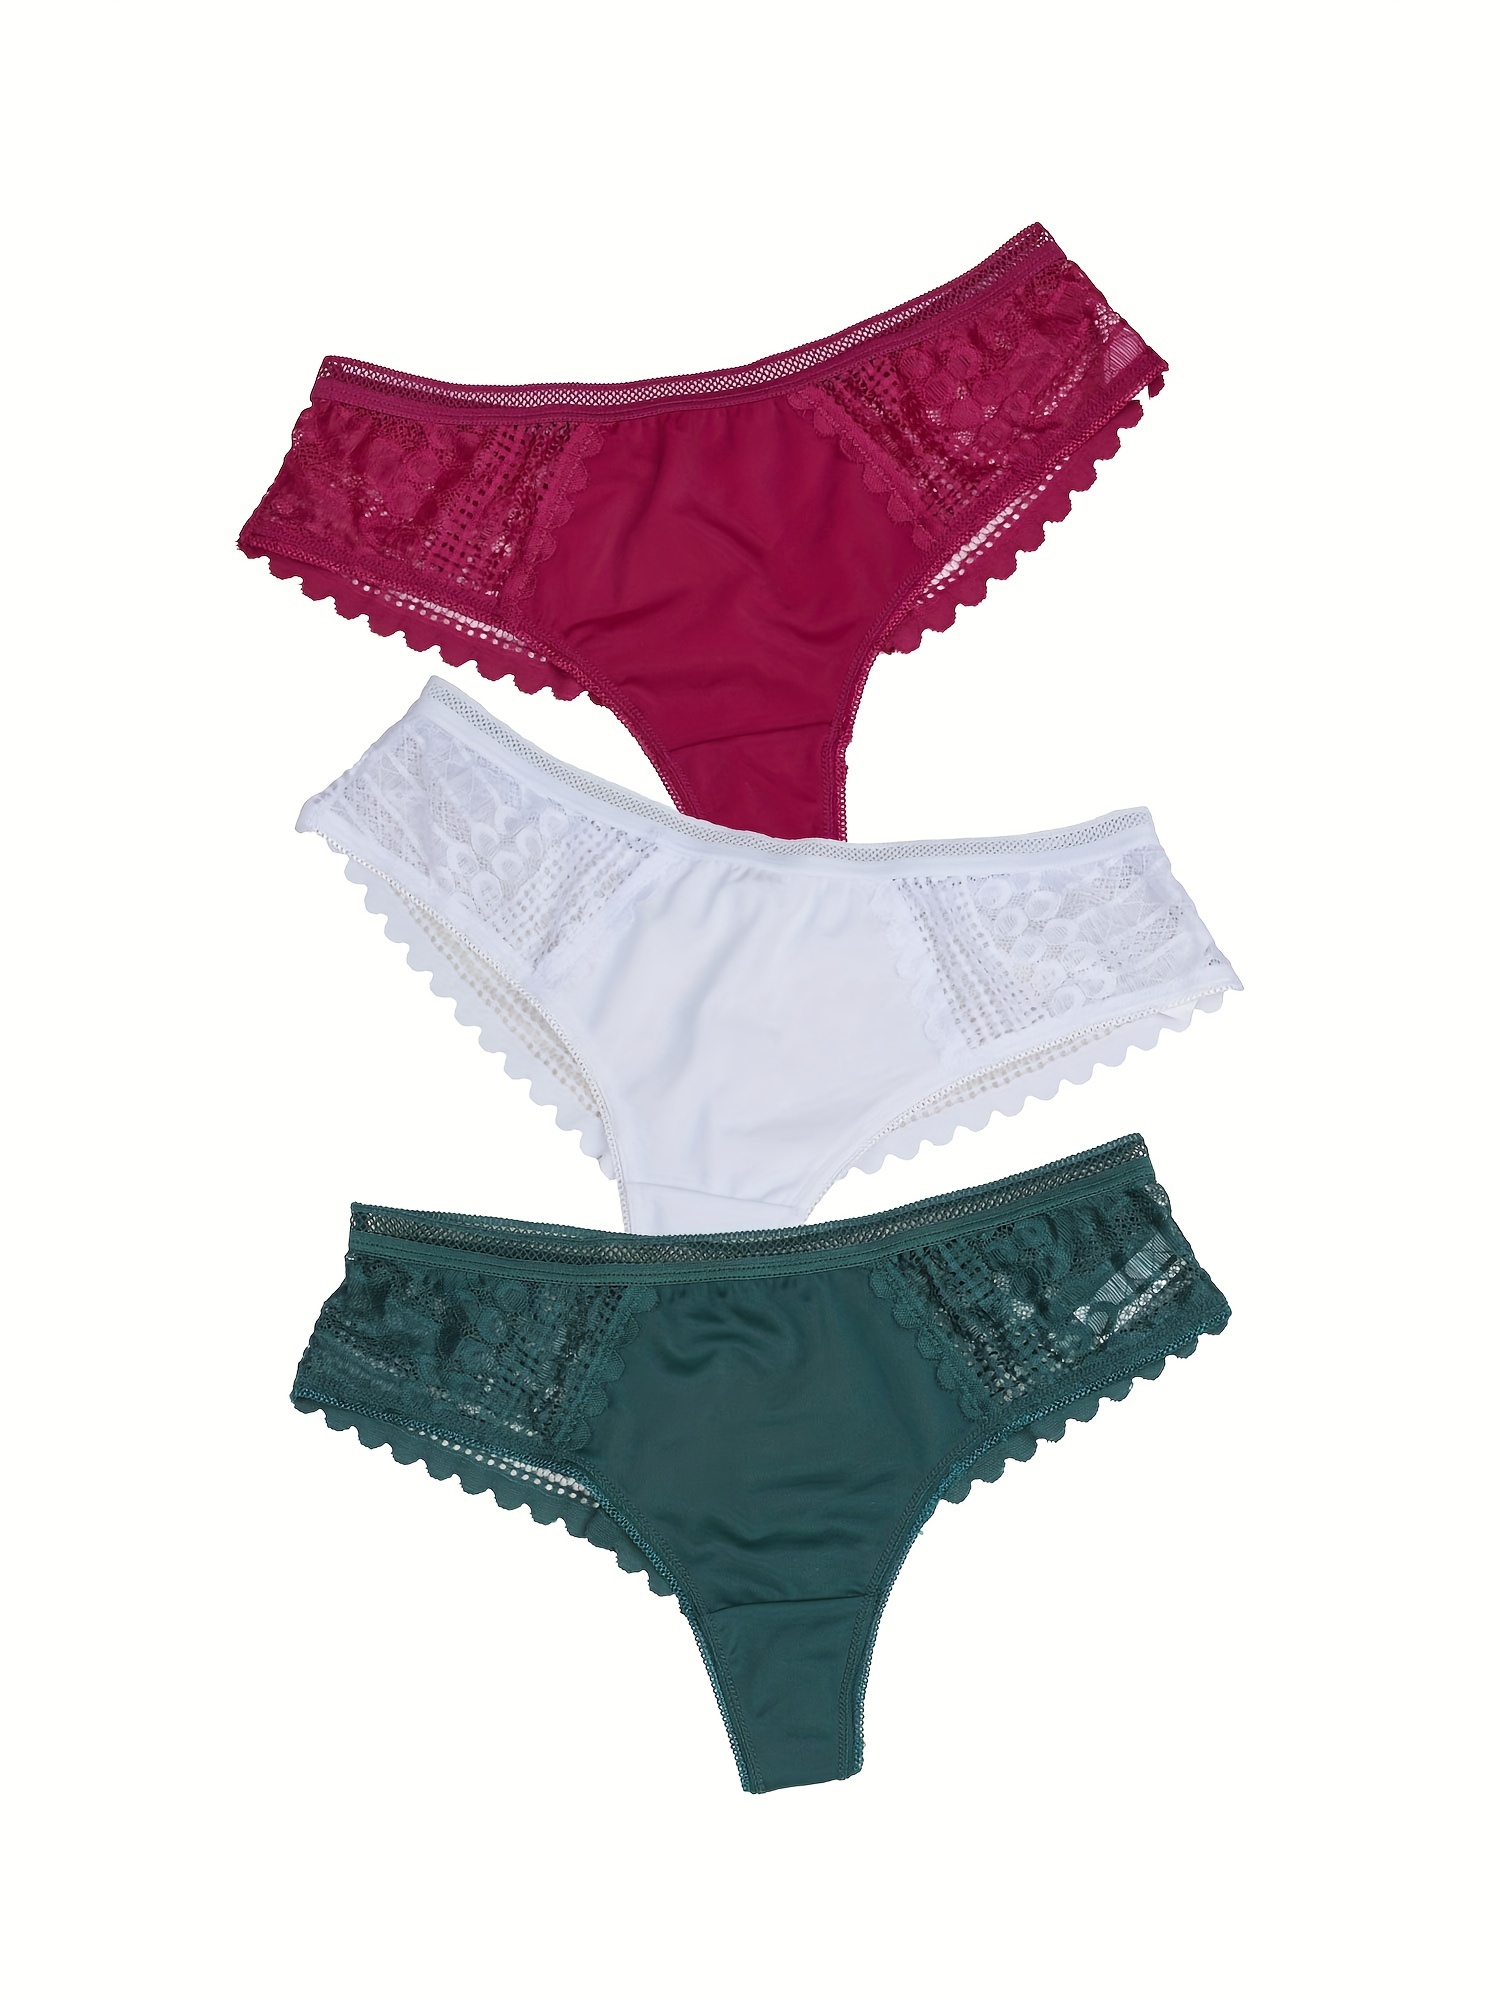 HOPE - Lace Cheeky Style Basic 3 Pack - Panties for Women